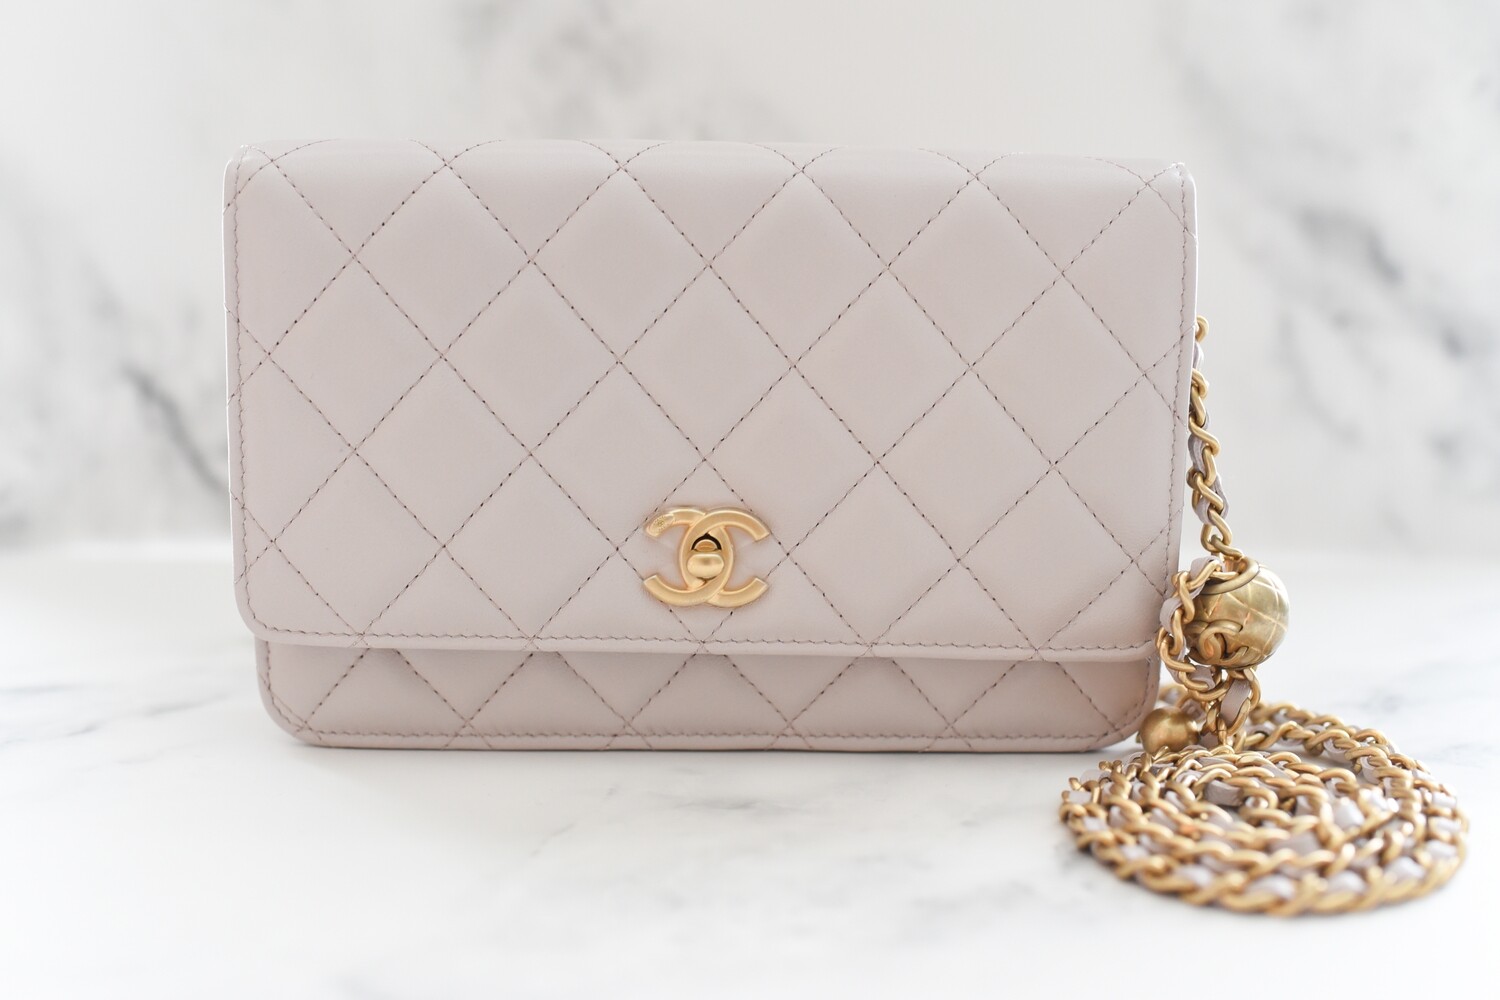 Chanel Wallet on Chain, Pearl Crush, Lilac Lambskin Leather with Gold  Hardware, New in Box WA001 - Julia Rose Boston